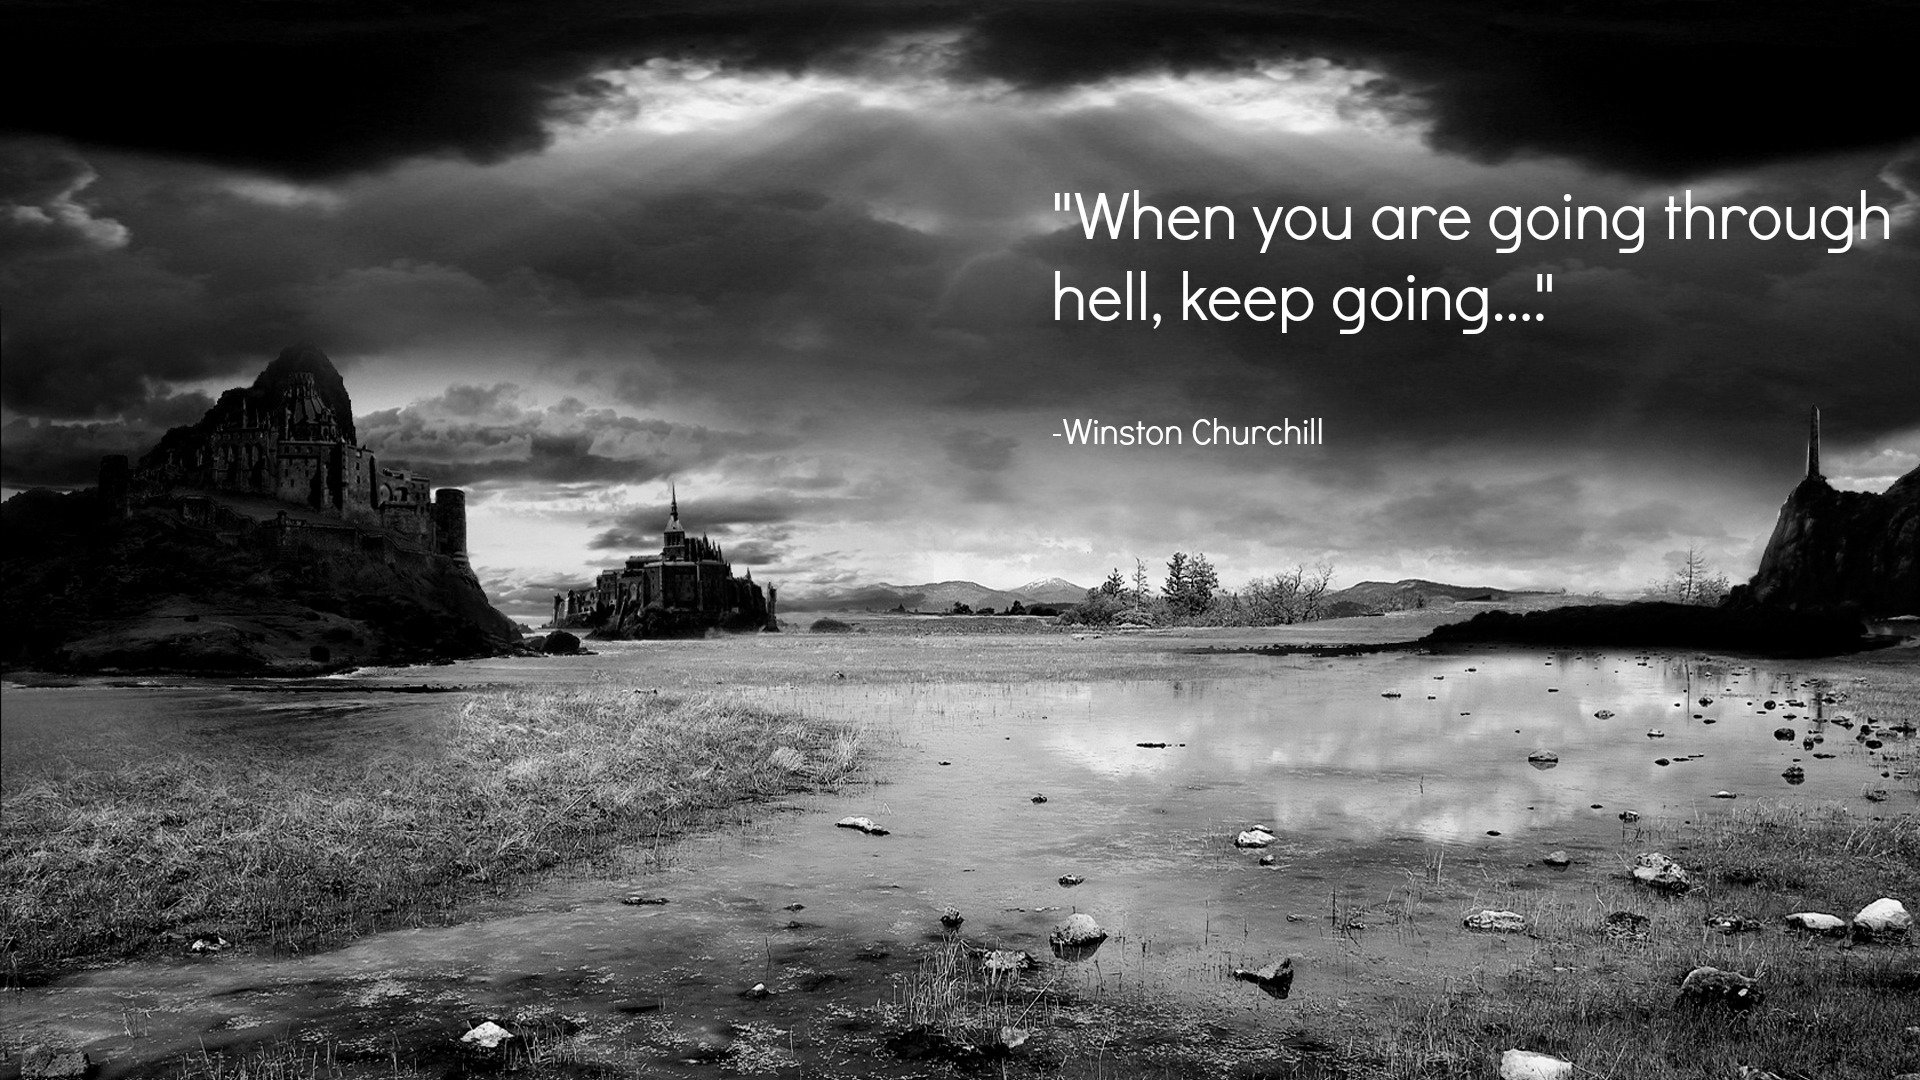 Motivational Wallpaper on Difficulties: When you are going through hell Give Up World